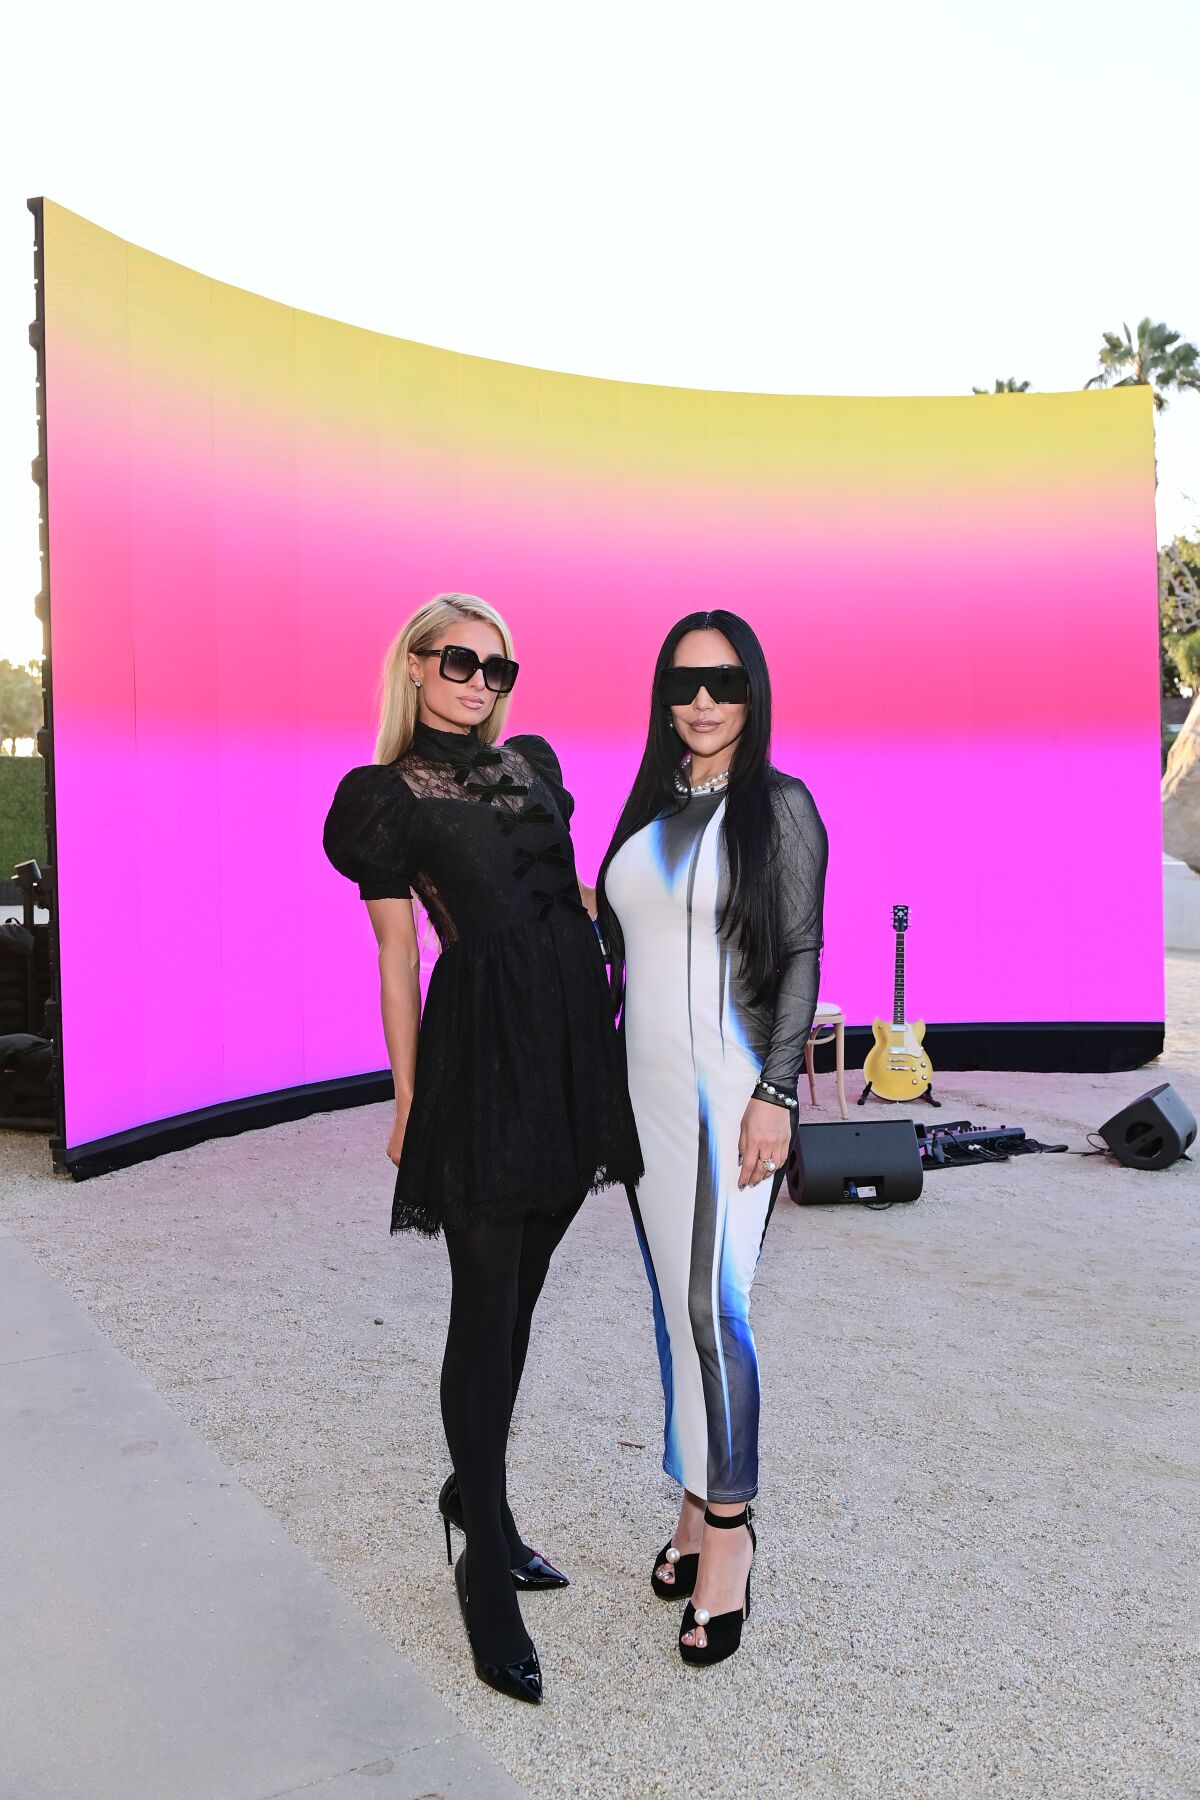 Two women stand before a colorful backdrop.